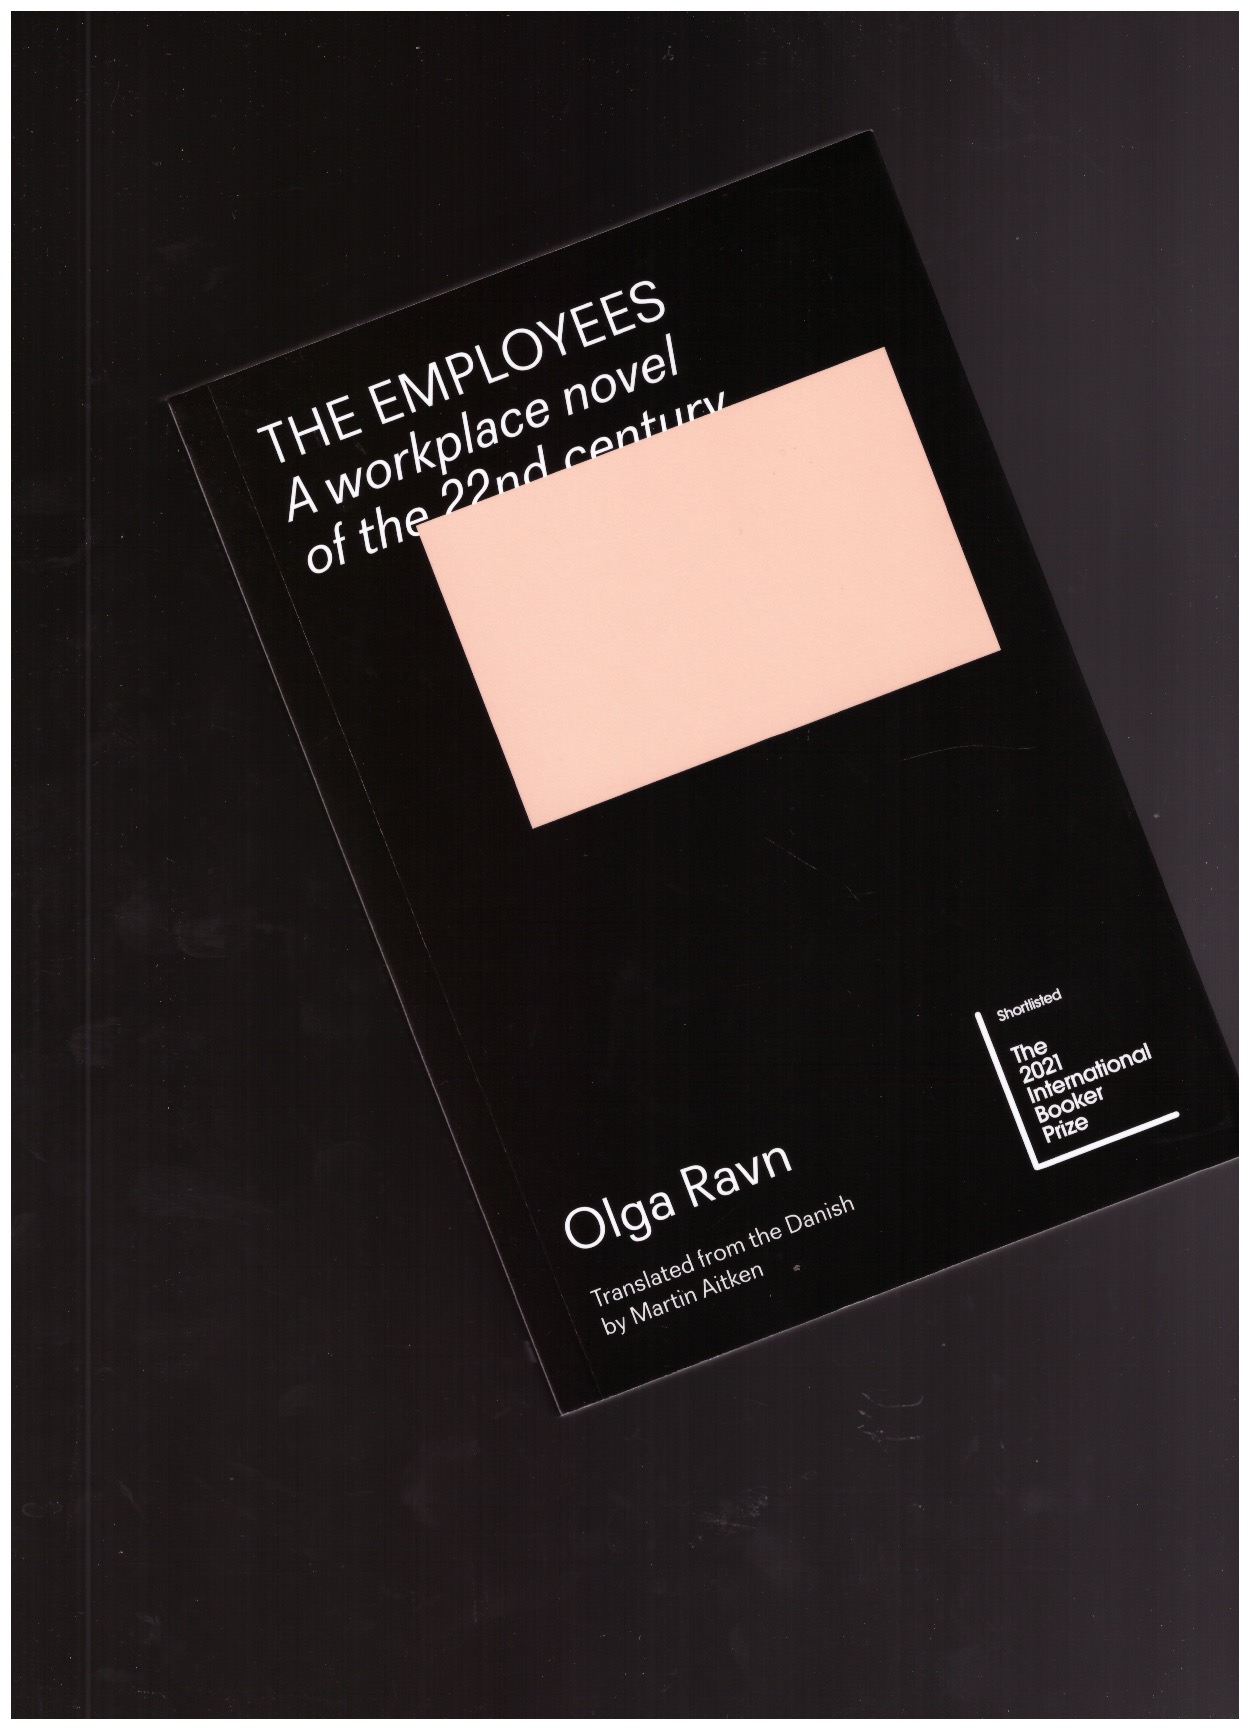 RAVN, Olga - The Employees: A workplace novel of the 22nd century